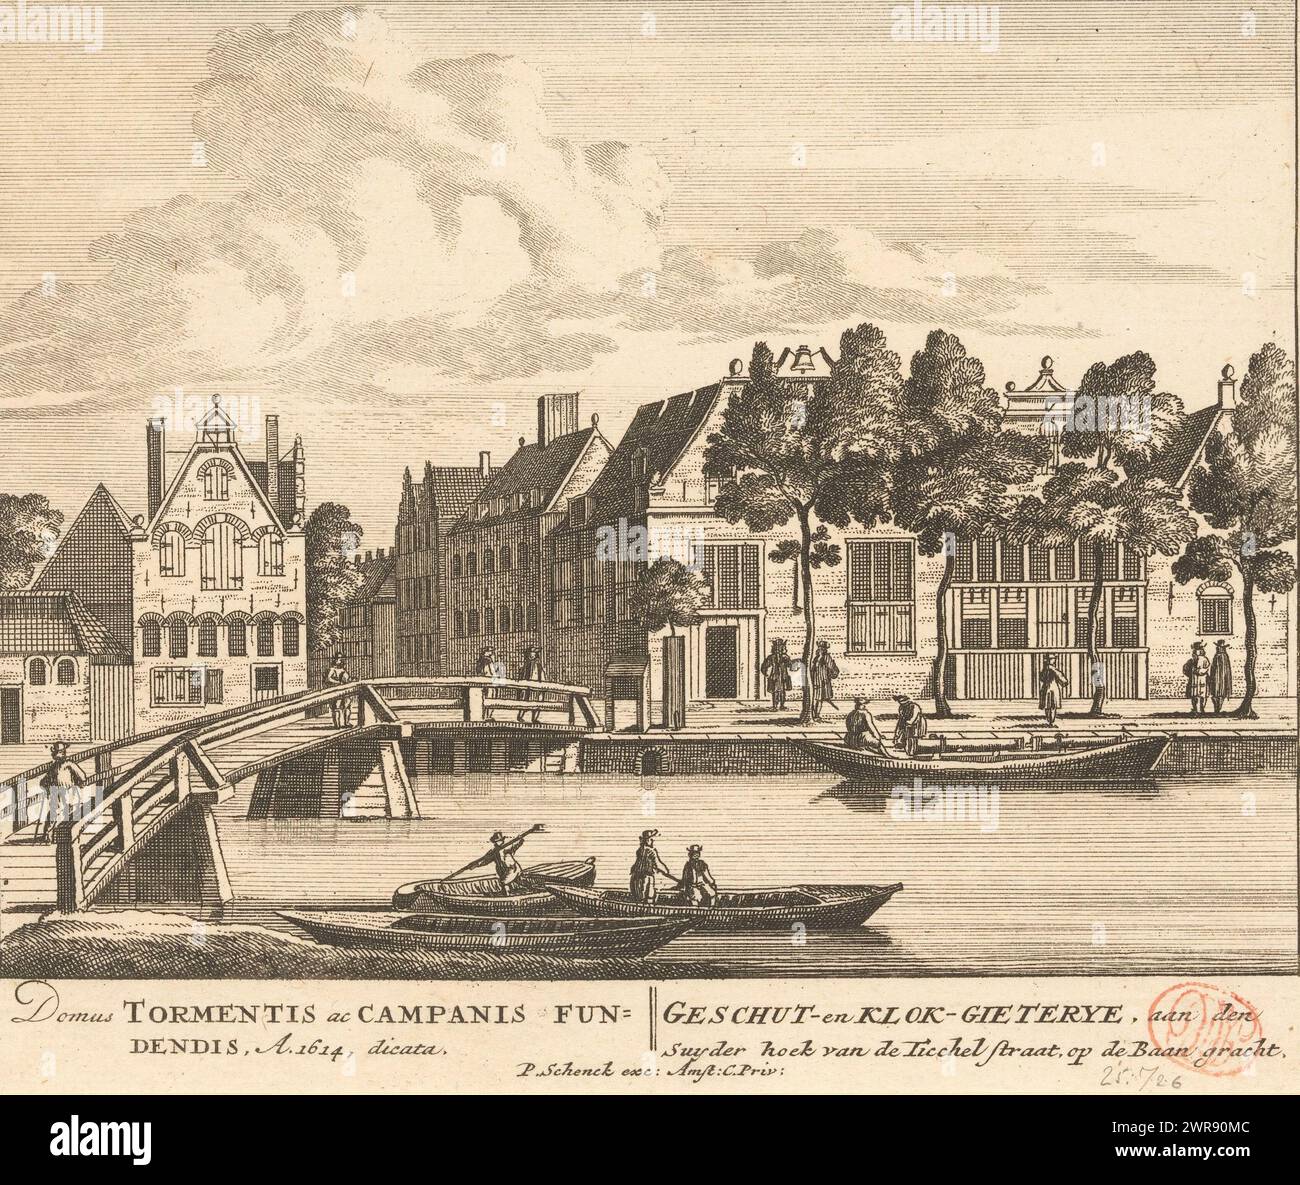 View of the Stads Geschut- en Klokkengieterij on the Lijnbaansgracht in Amsterdam, Geschut- en Klok-Gieterye, on the suyder corner of the Ticchelstraat, on the Baangracht / Domus Tormentis ac Campanis Fundendis, A. 1614 dicata (title on object), 100 Images of the main buildings of Amsterdam (series title), View of the City Artillery and Bell Foundry on Lijnbaansgracht, on the corner with Tichelstraat, in Amsterdam. Viewed from the west. Below the performance the title in Latin and Dutch., print maker: anonymous, publisher: Pieter Schenk (I ), publisher: Barent Greve, (possibly), Amsterdam Stock Photo